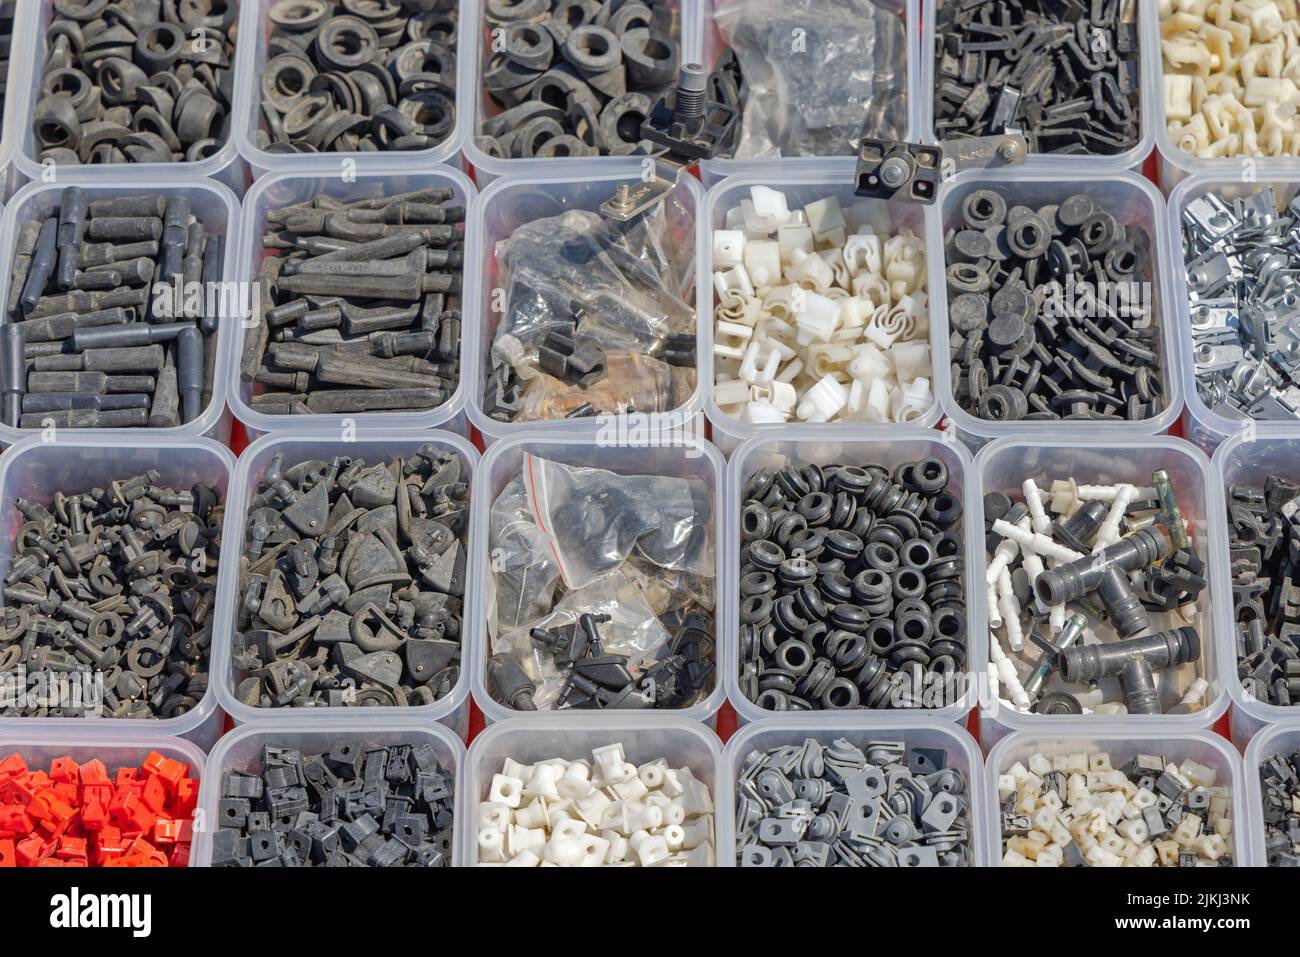 Small Rubber Spare Parts Mix in Trays for Vehicles Stock Photo